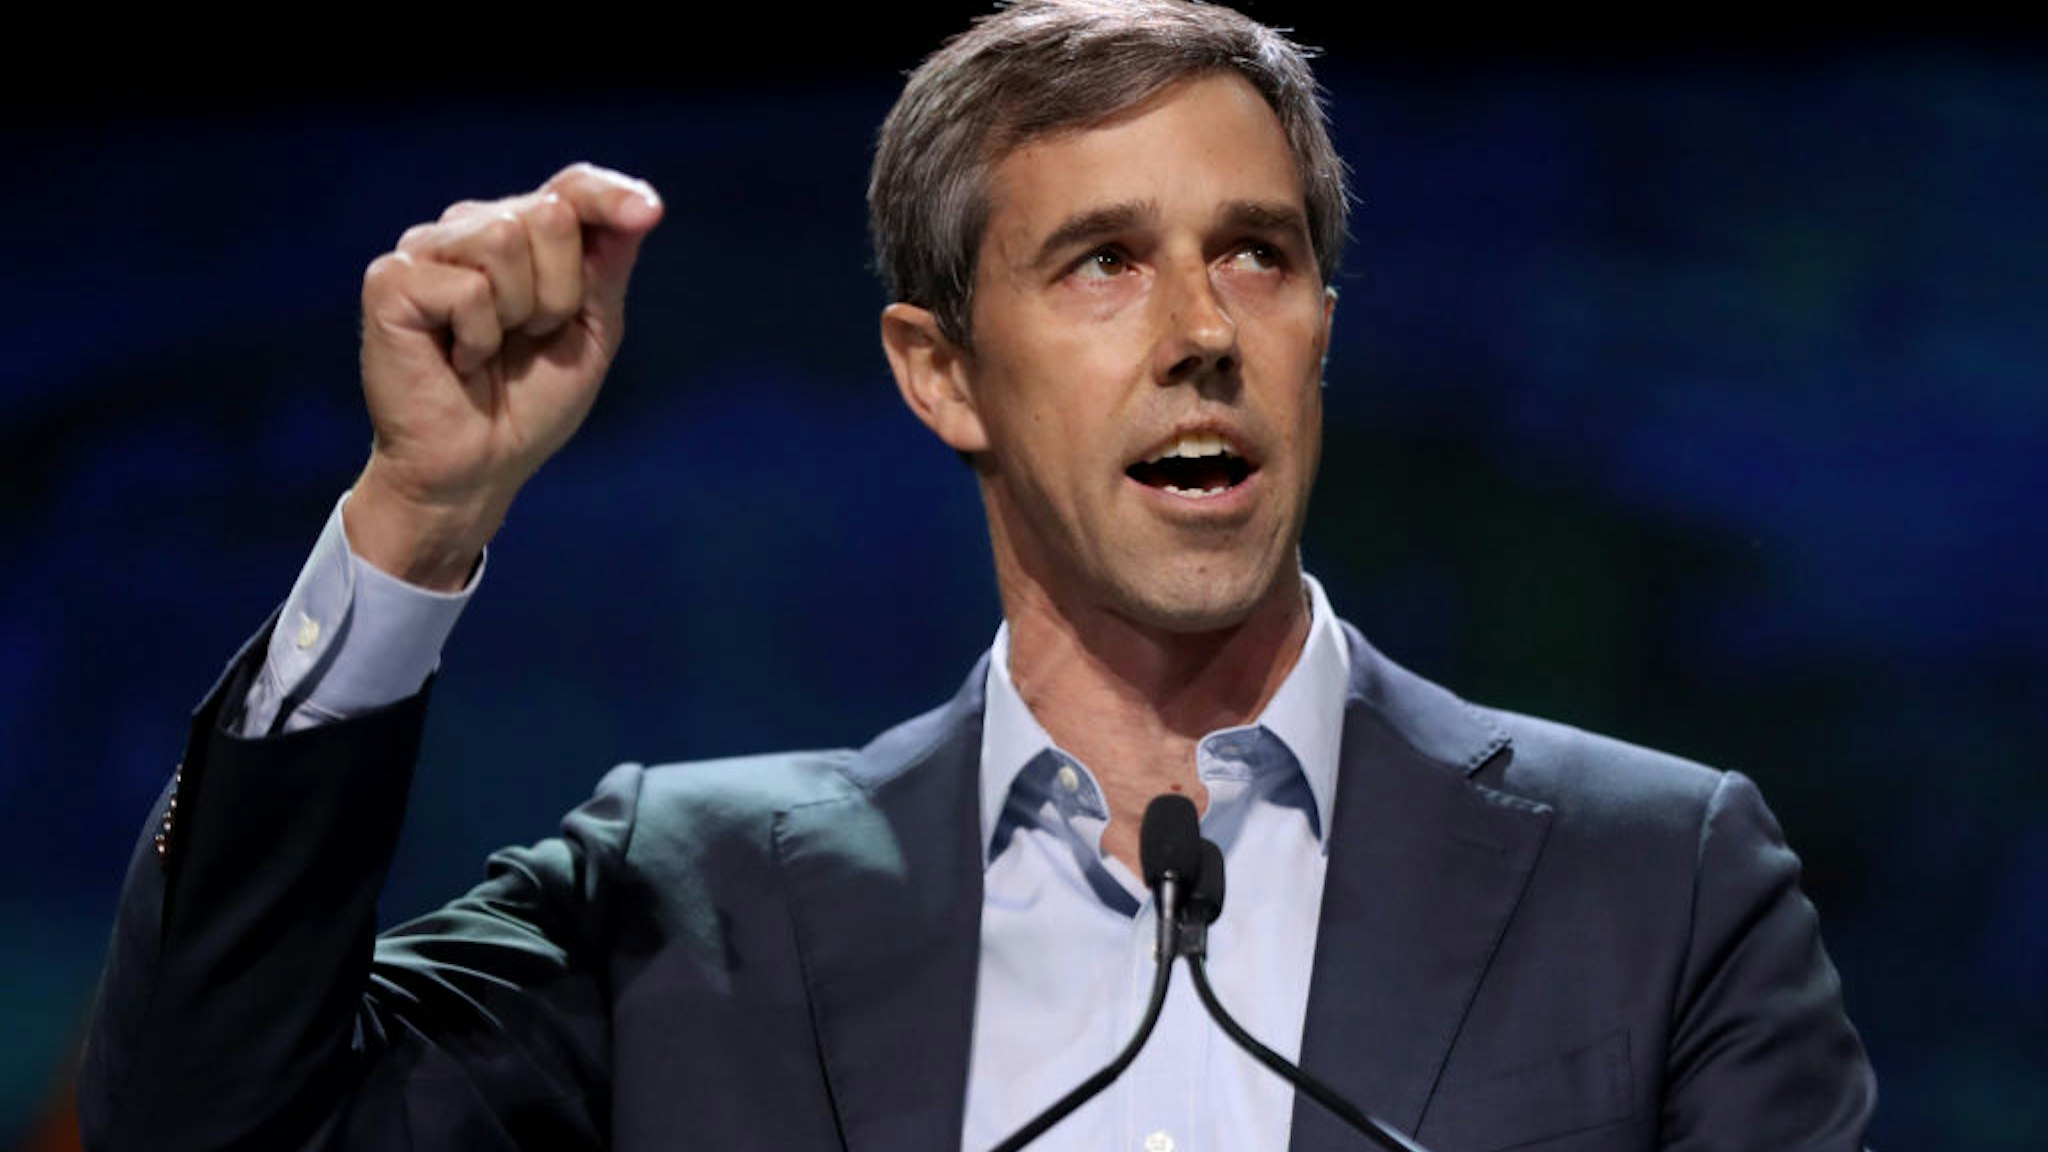 SAN FRANCISCO, CALIFORNIA - JUNE 1: Democratic presidential candidate and former U.S. Rep. Beto O'Rourke speaks during Day 2 of the California Democratic Party Convention at the Moscone Convention Center in San Francisco, Calif., on Saturday, June 1, 2019. (Photo by Ray Chavez/MediaNews Group/The Mercury News via Getty Images)